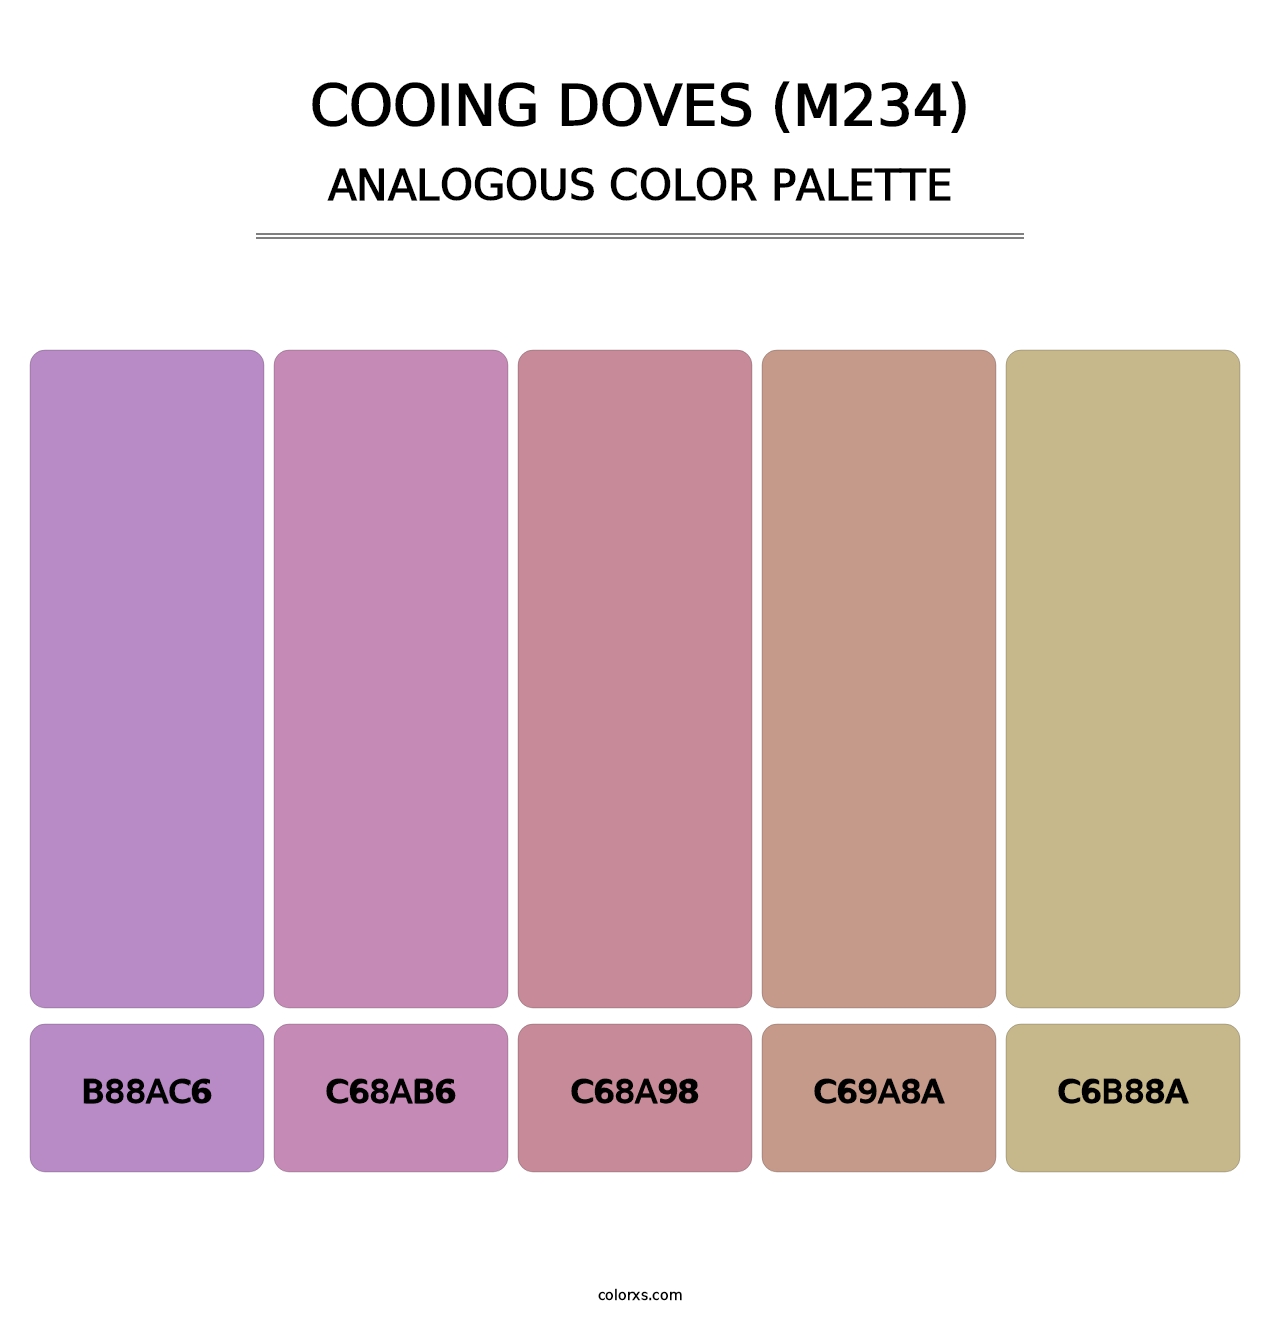 Cooing Doves (M234) - Analogous Color Palette